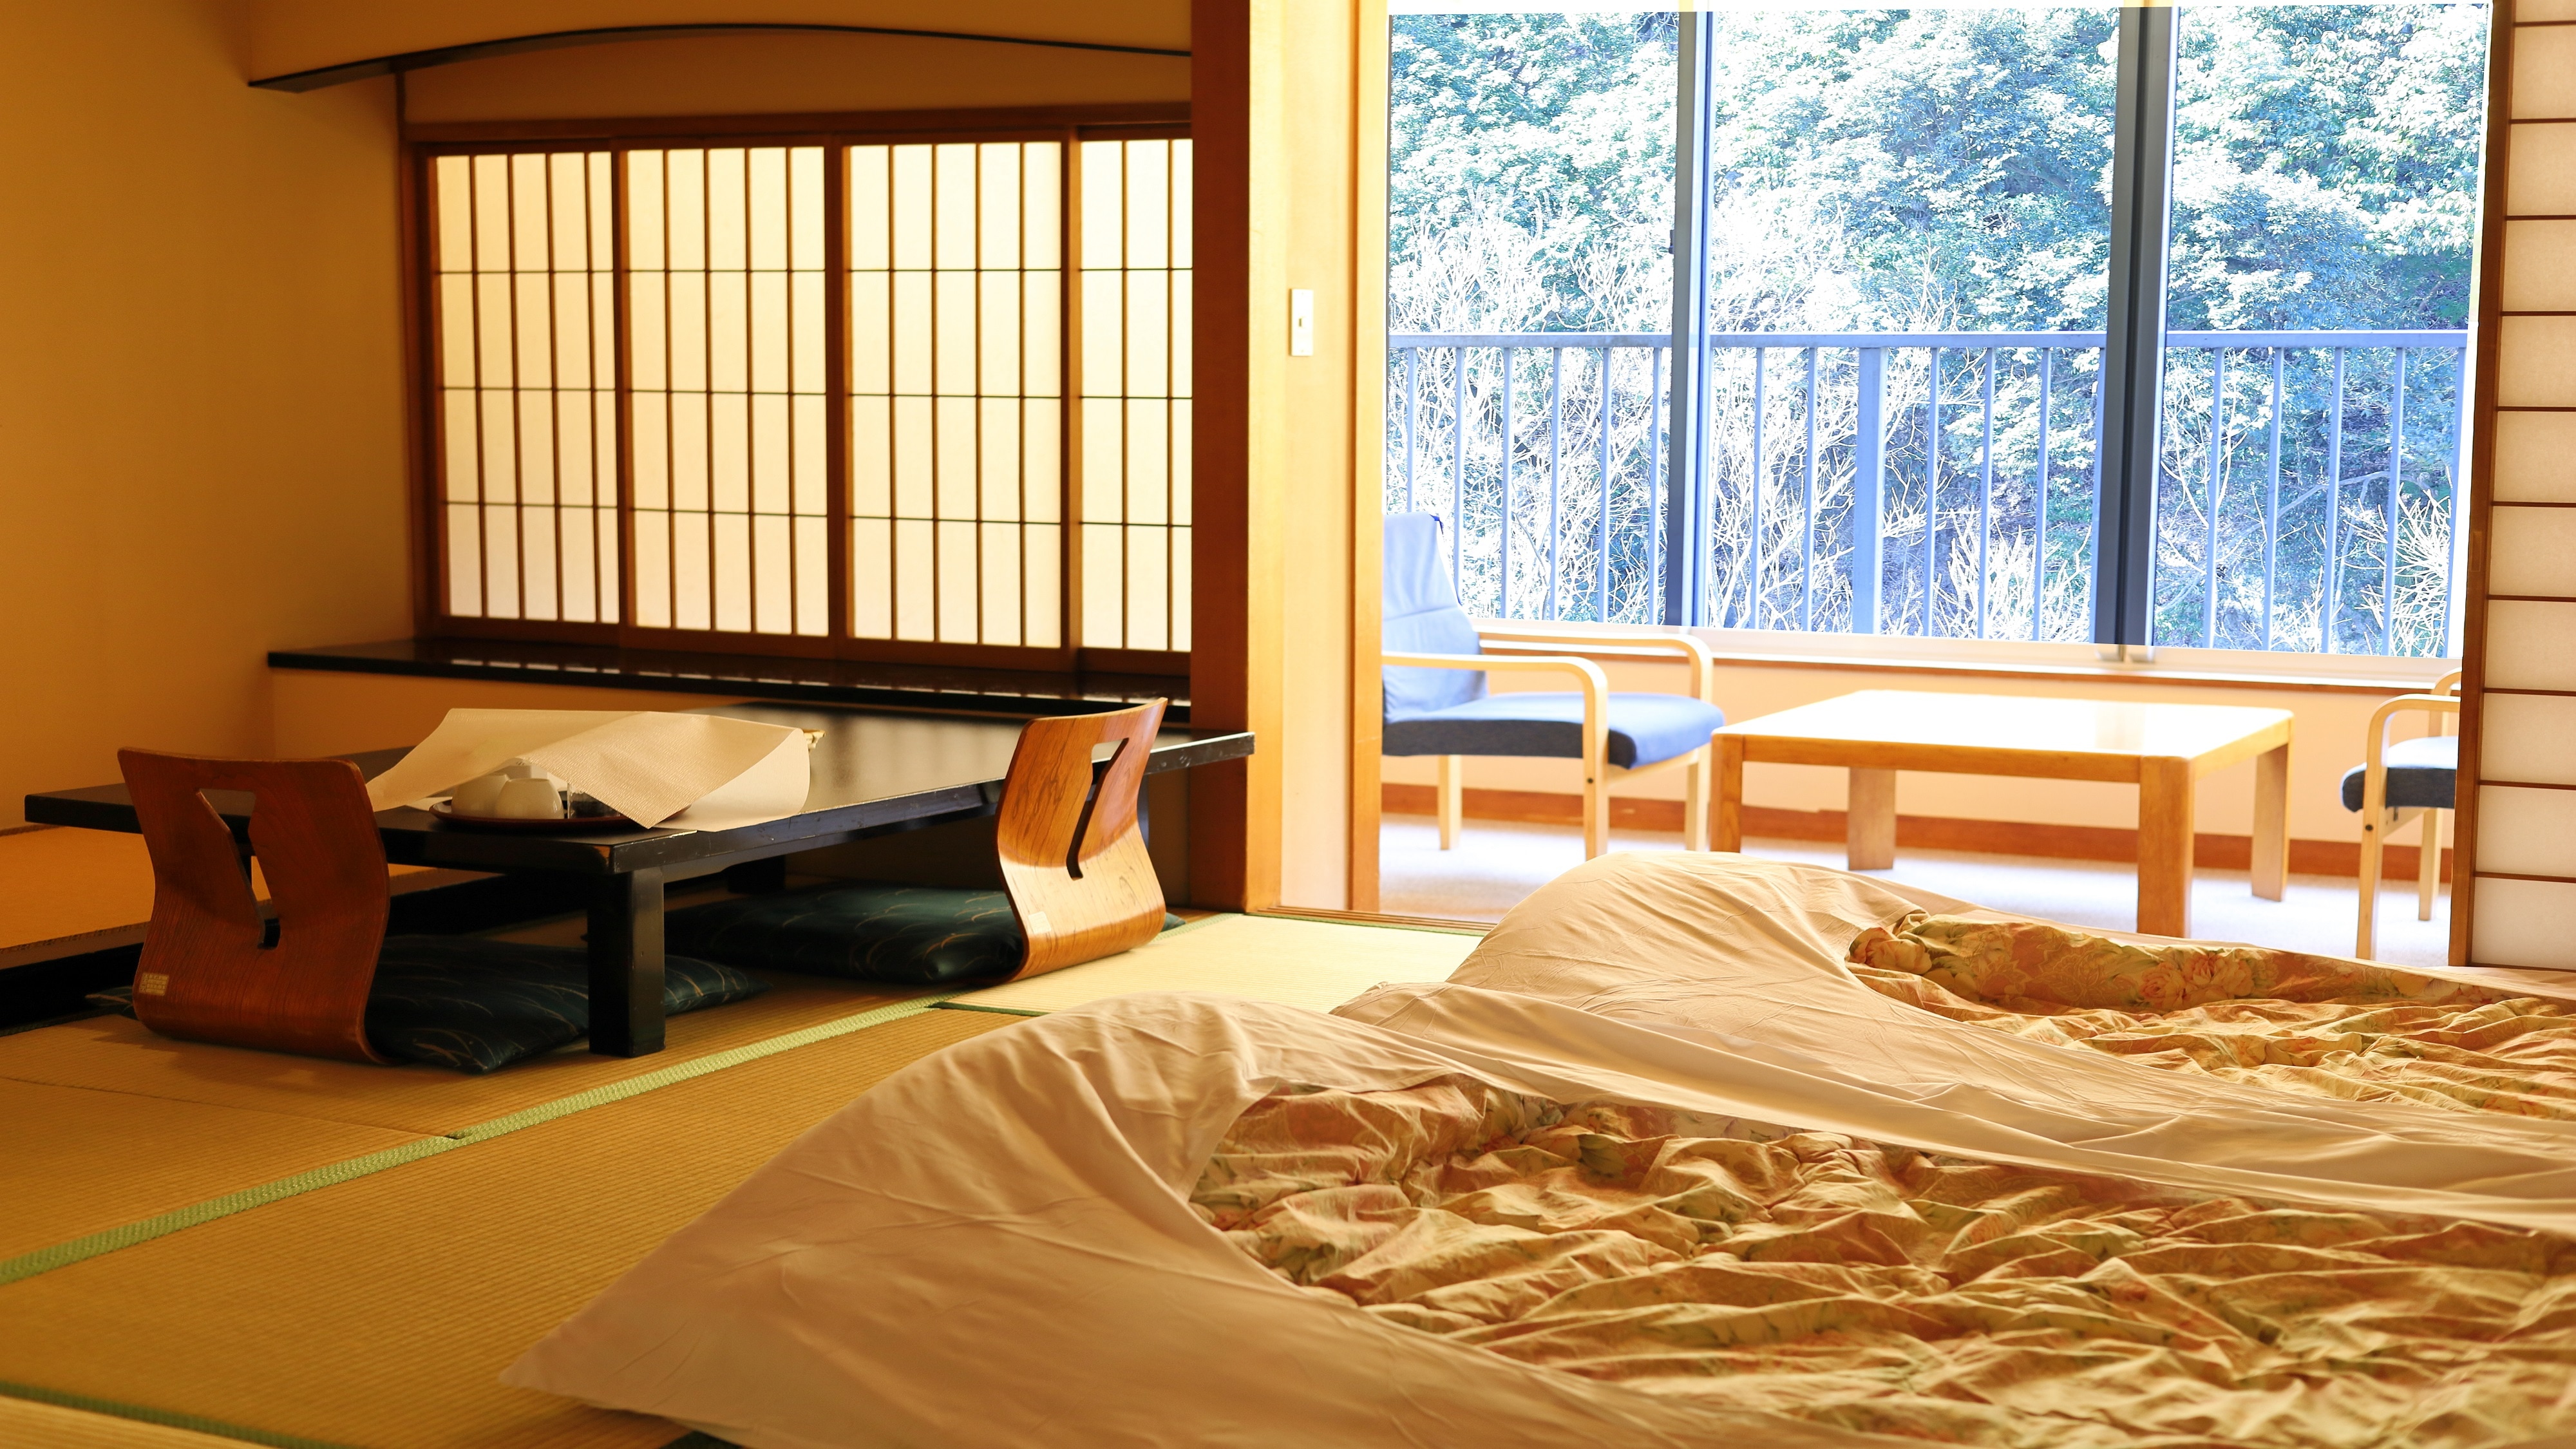 Japanese-style room: Example of futon